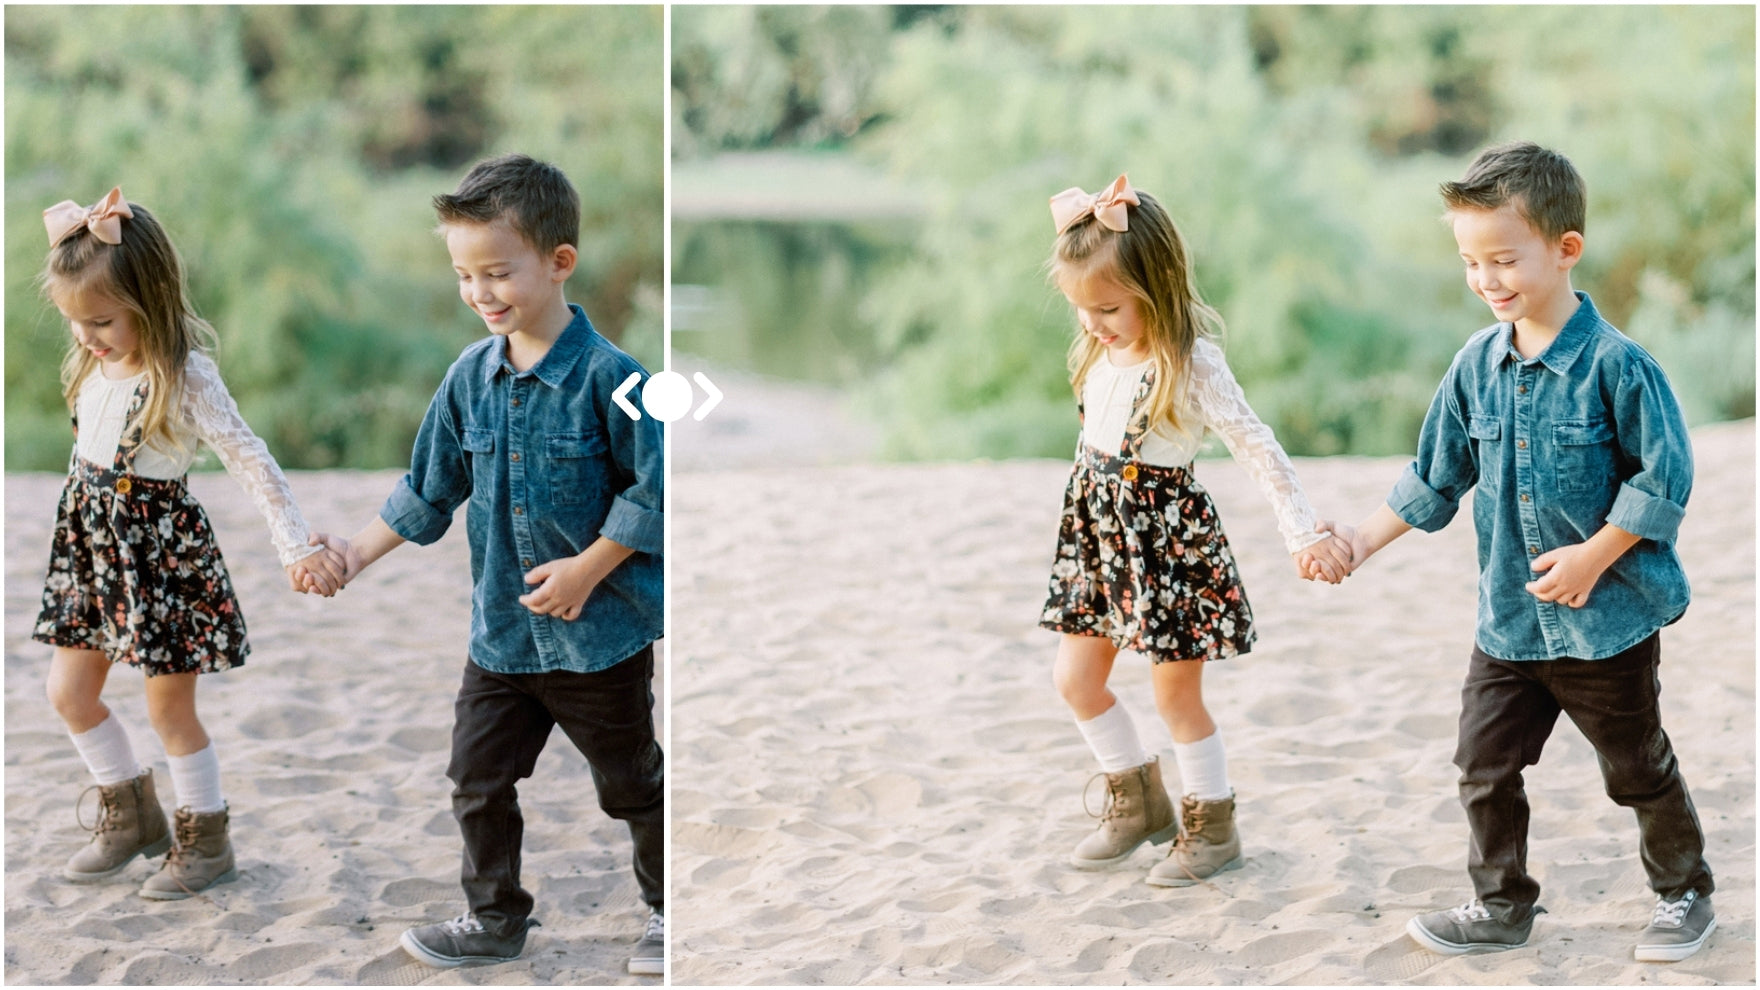 The Best Light And Airy Presets For Lightroom Portra 400 Presets By Lou And Marks Presets